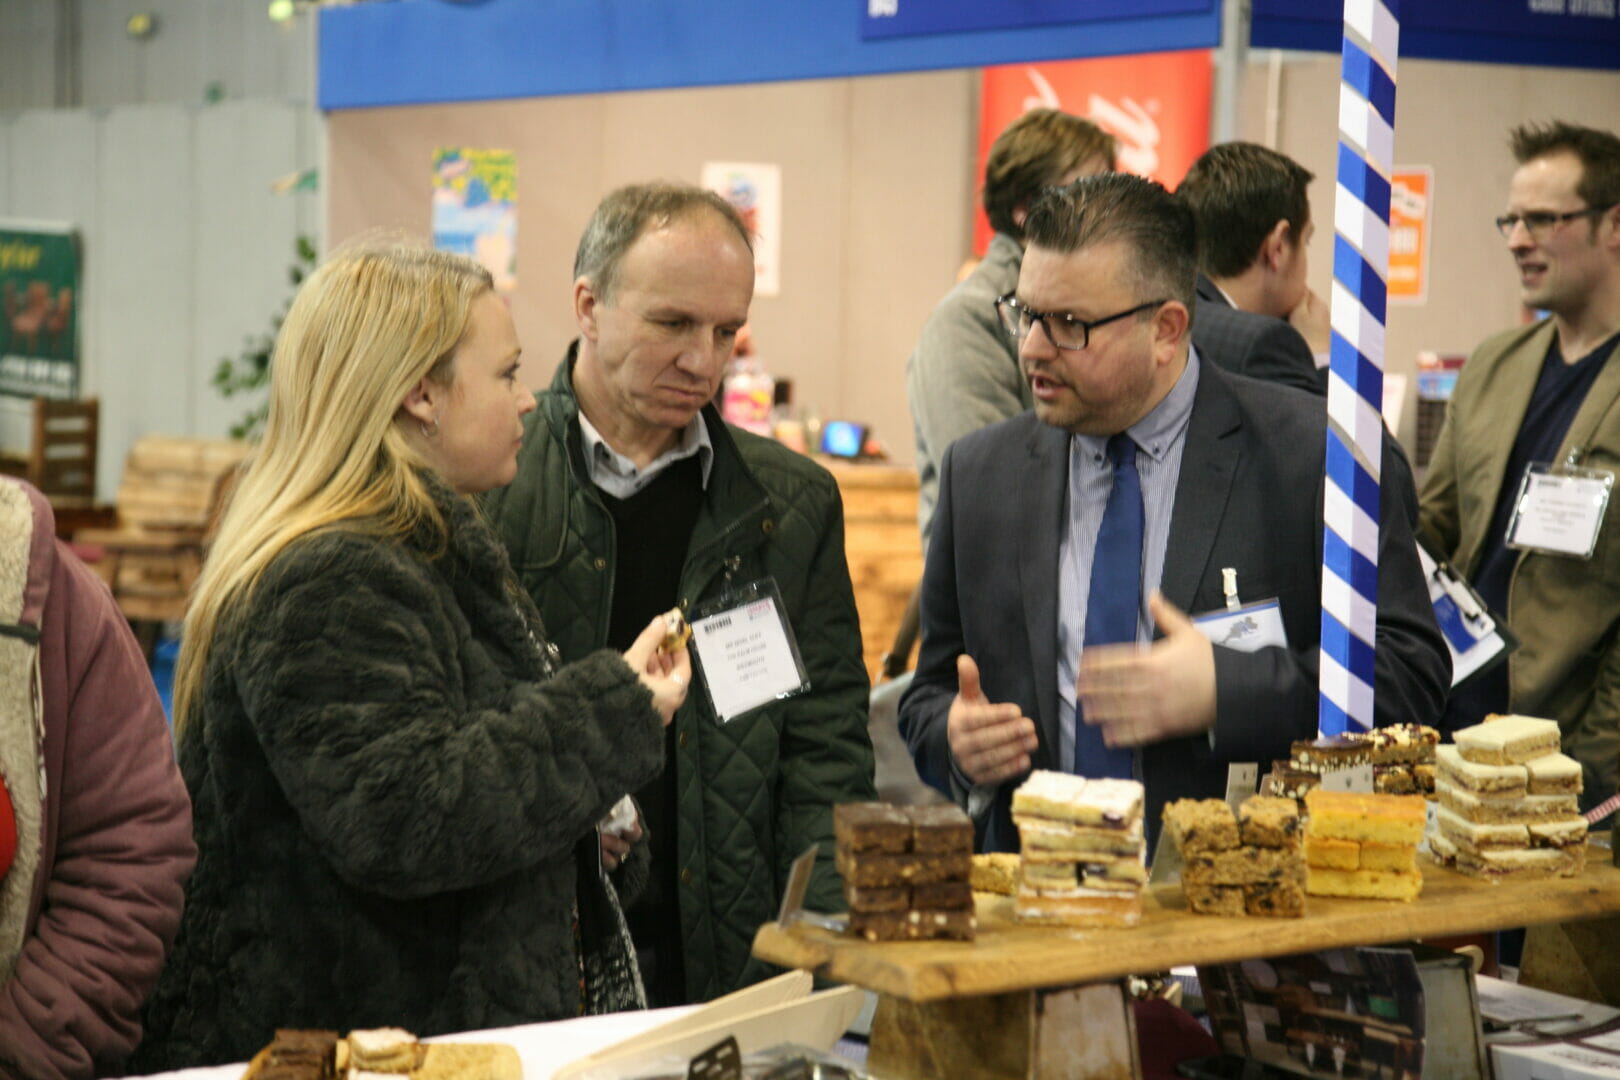 A Diverse range of exhibitors at the Source trade show in 2017